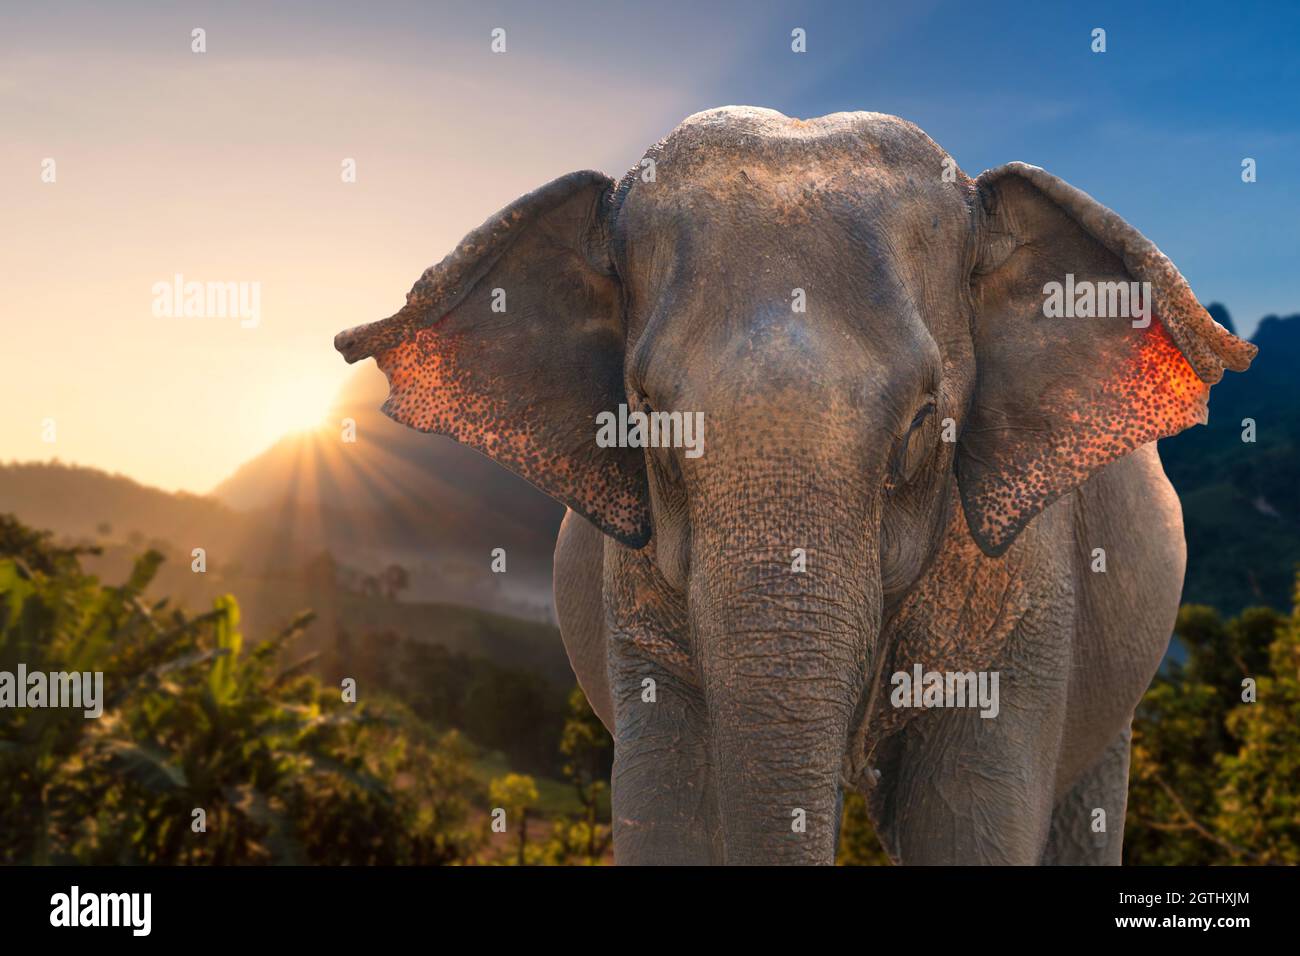 Asian Elephant In Nature Mountain With Sunshine Environment Stock Photo